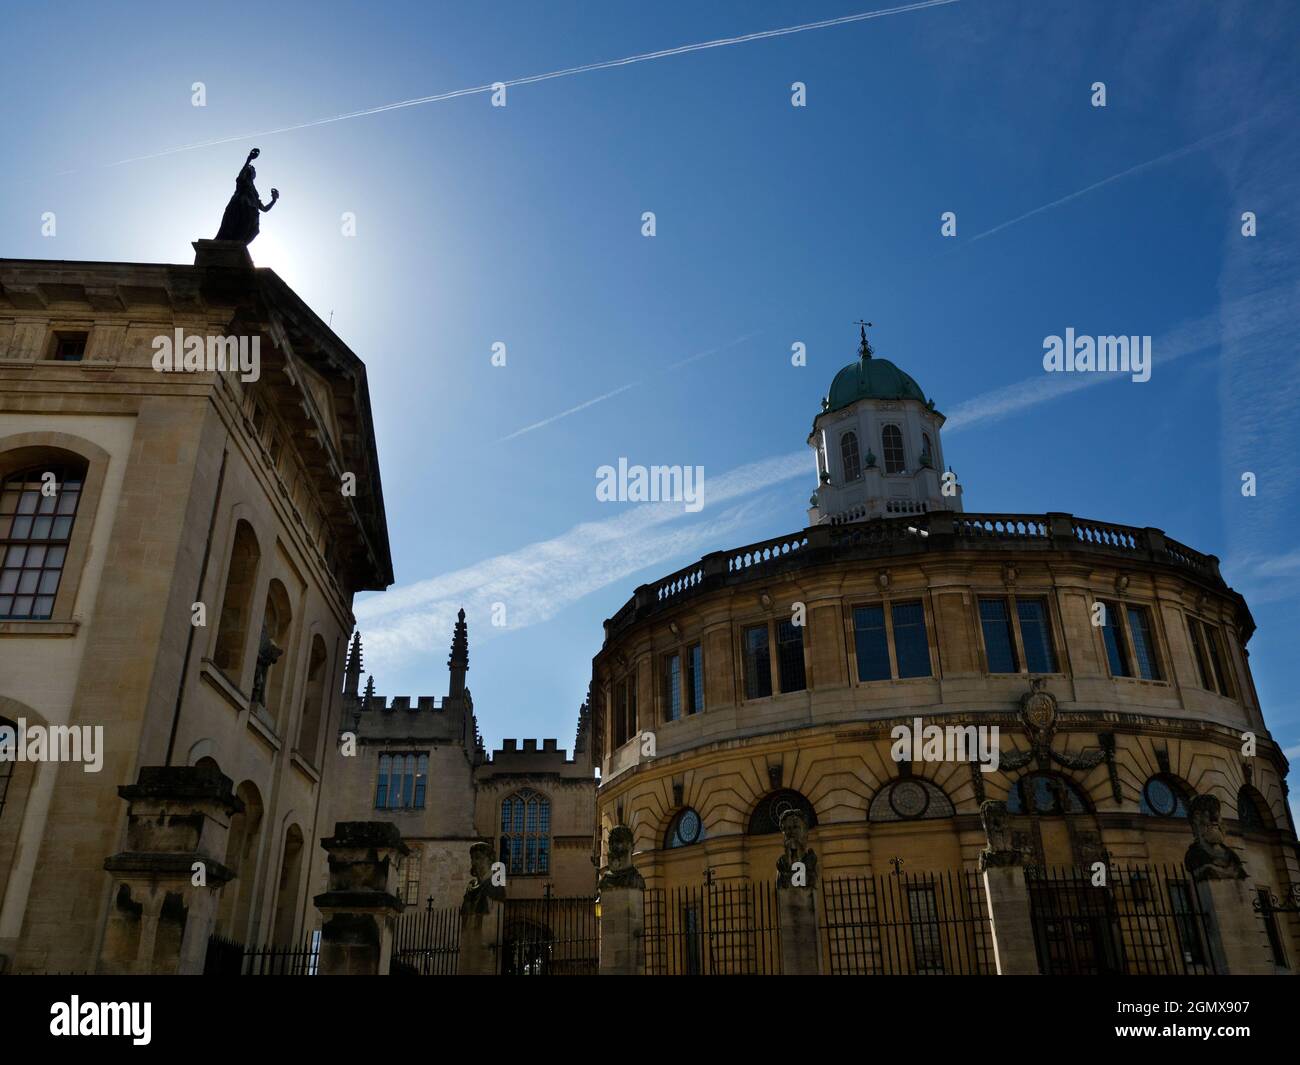 The distinctive round Sheldonian Theatre, located in the heart of Oxford, England, was built from 1664 to 1669 based on an early design by Christopher Stock Photo